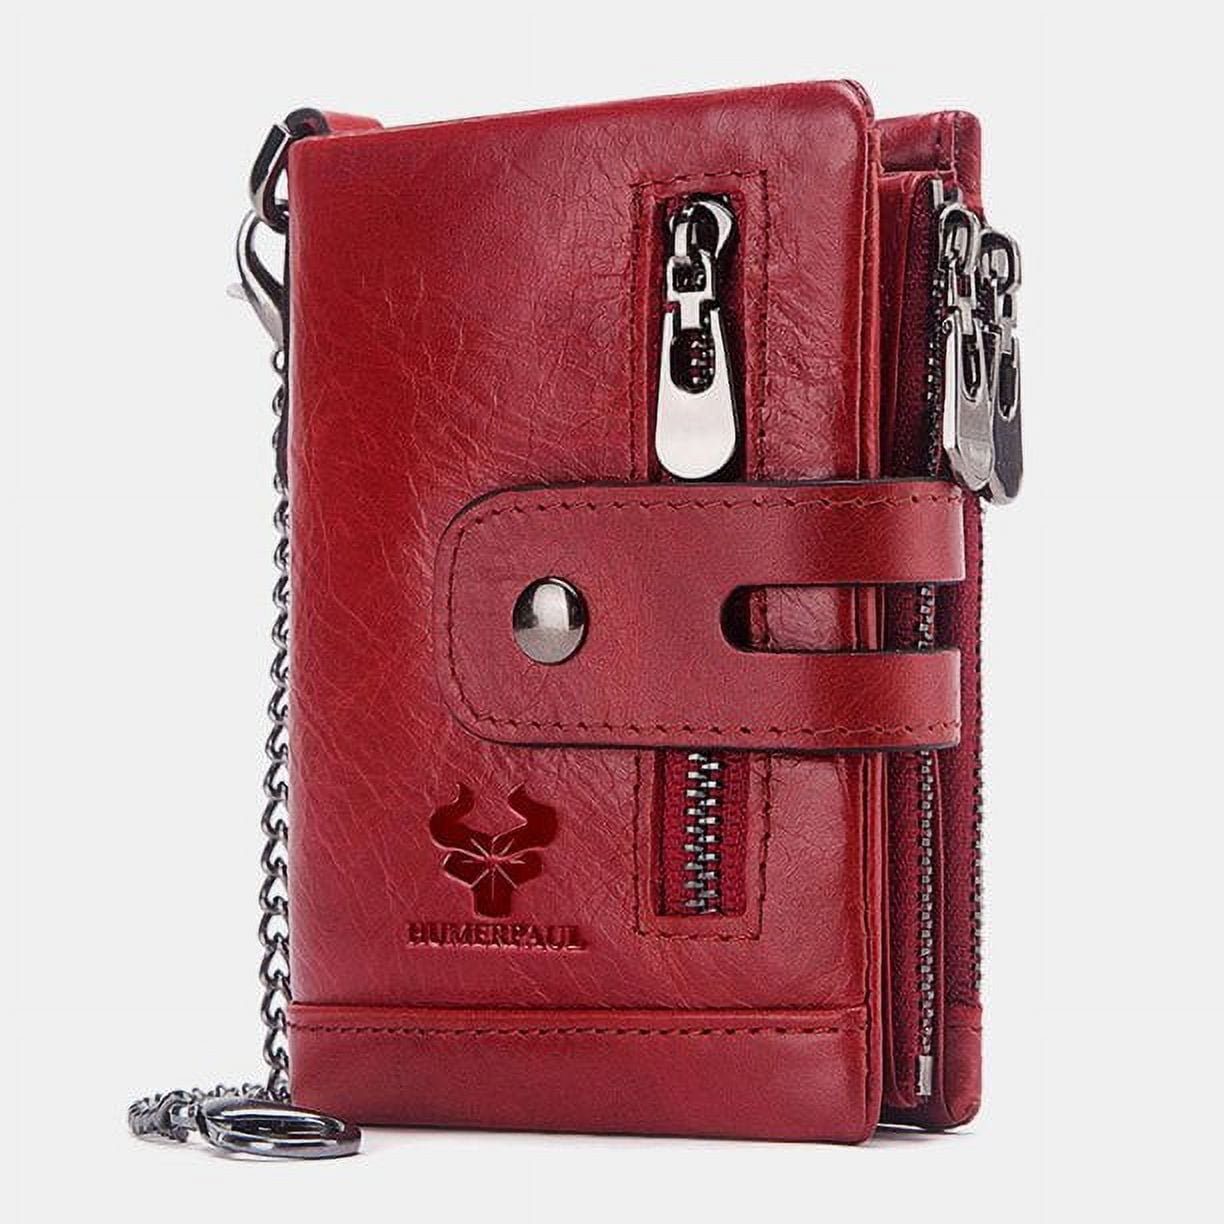 Chain Wallets for Men Genuine Leather RFID Blocking Bifold Wallets  Anti-Theft